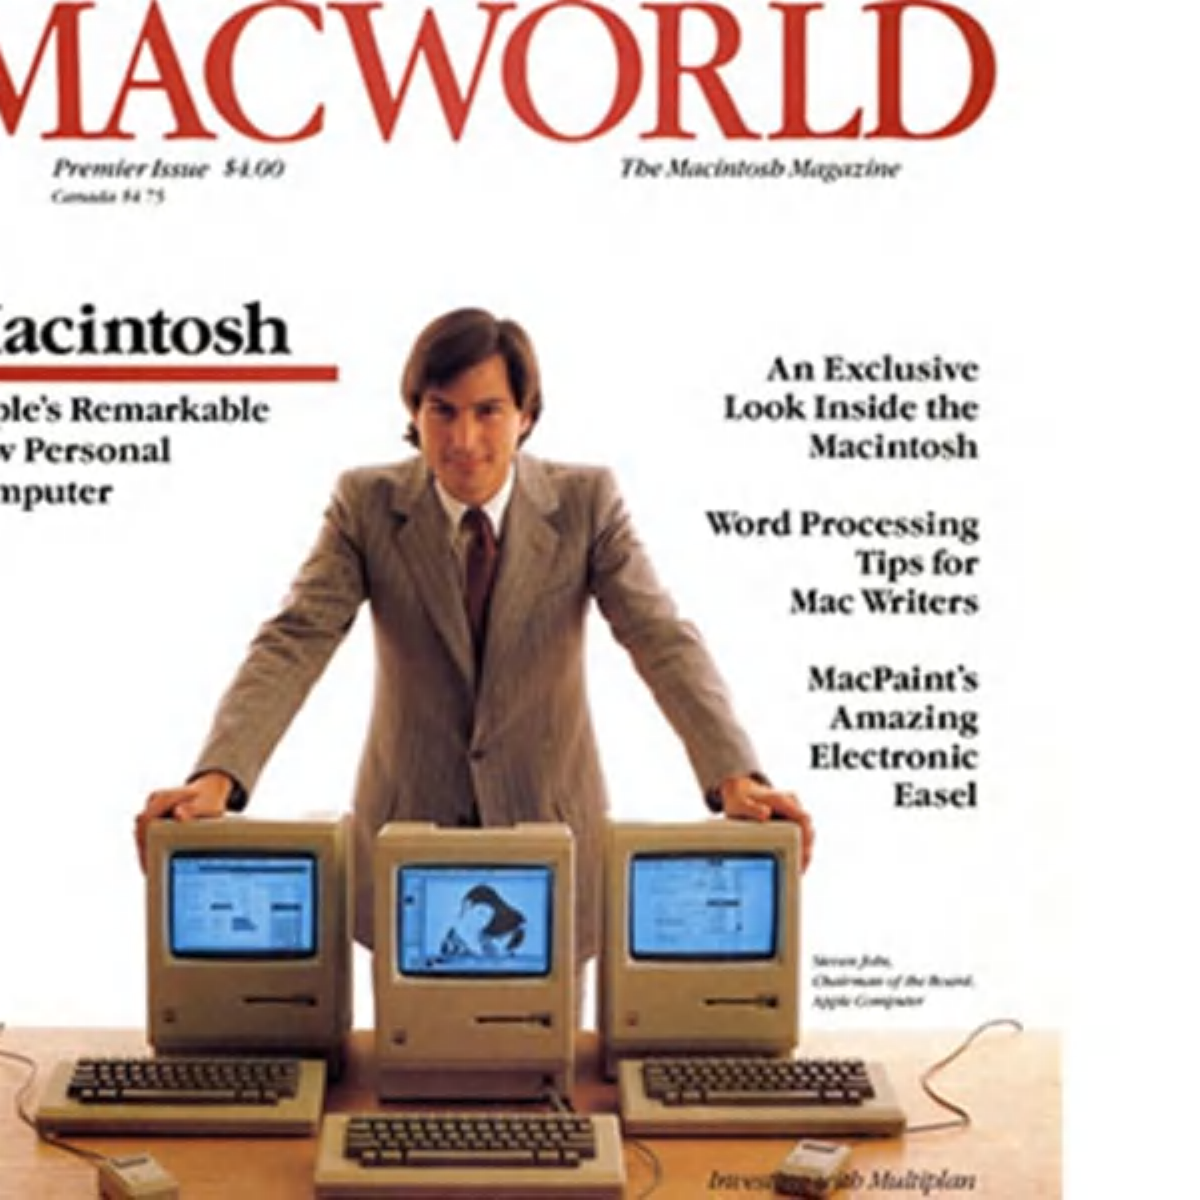 5 Vintage Computing Moments from 'Macworld' Issue 1 (April 1984 